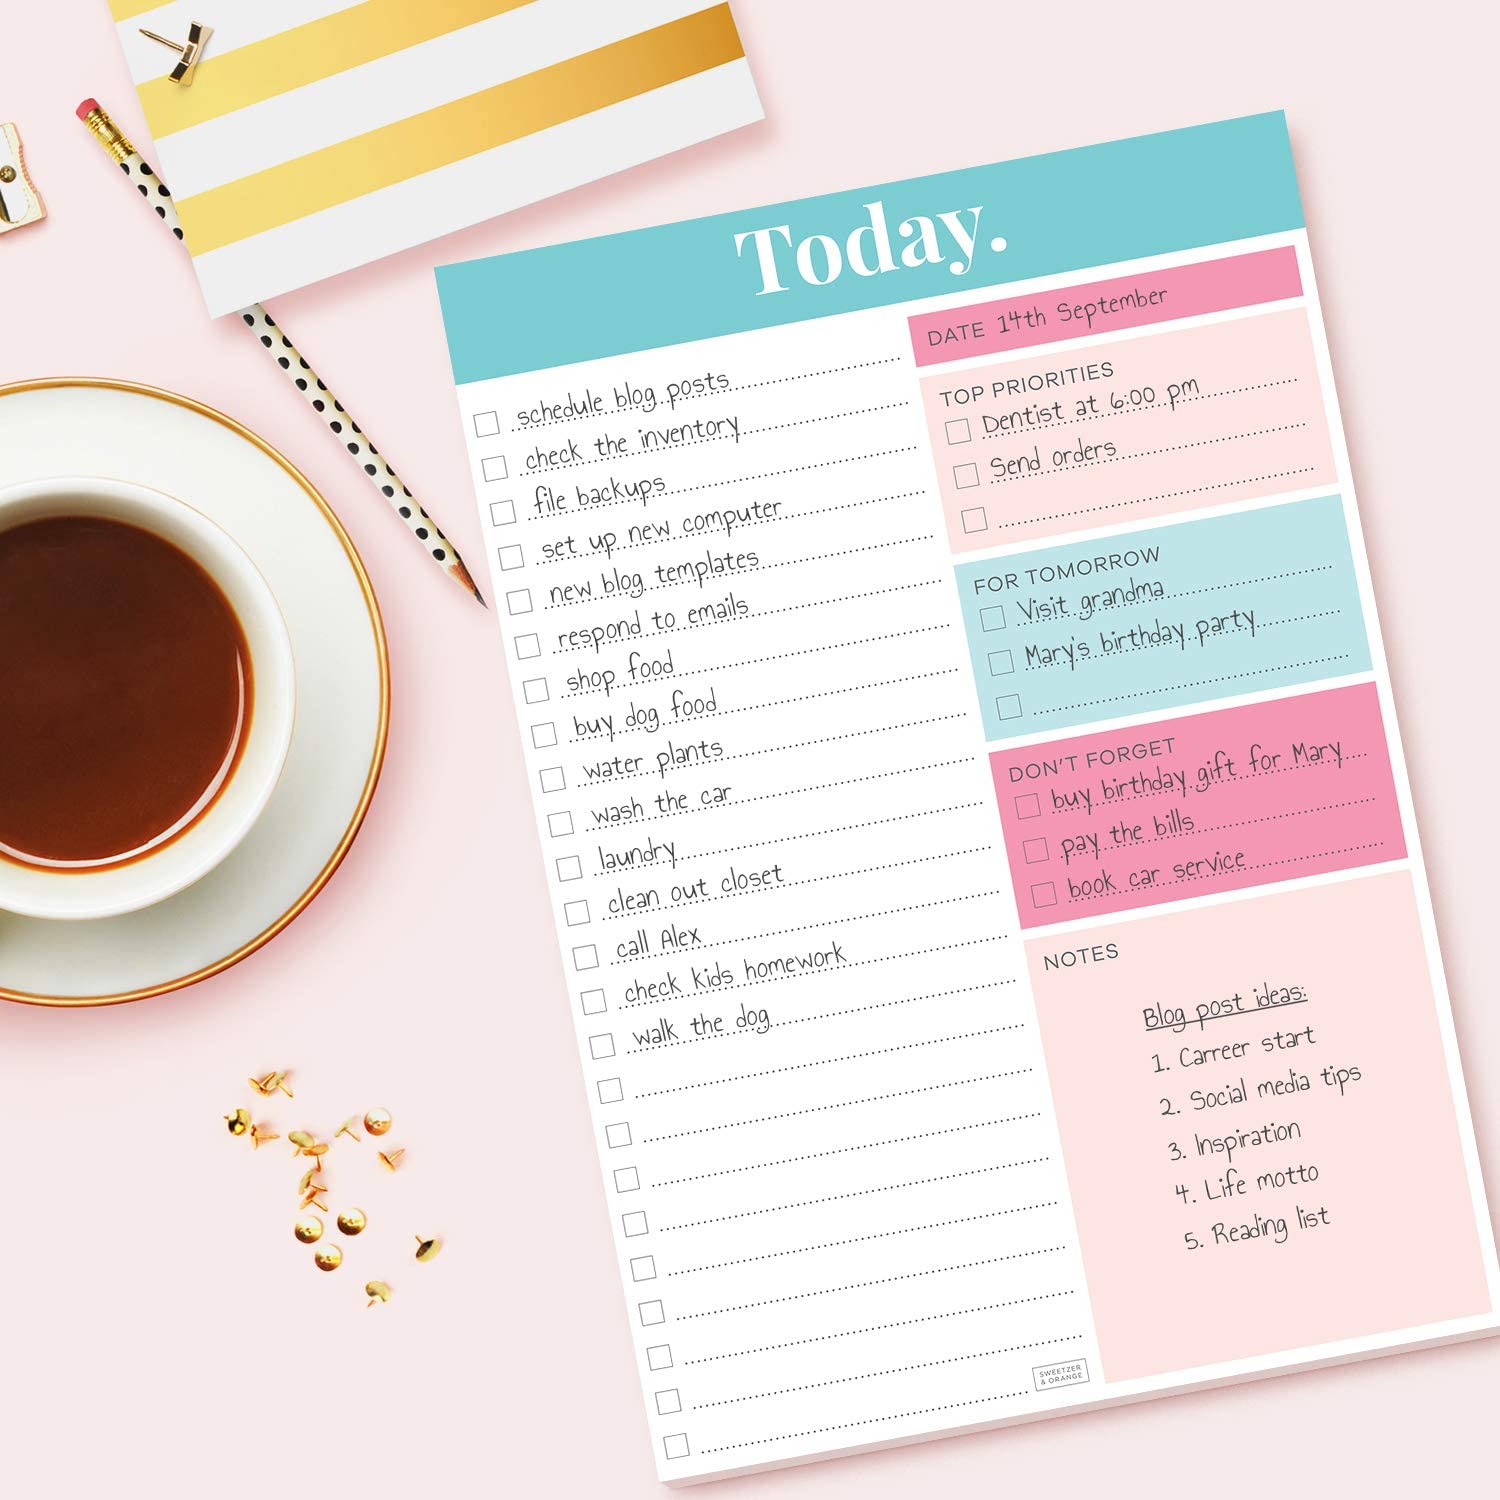 Costom Sticky Notes memo padundated Daily To Do List Notepad Planner Shopping List Checklist Customizable  Hot sale products